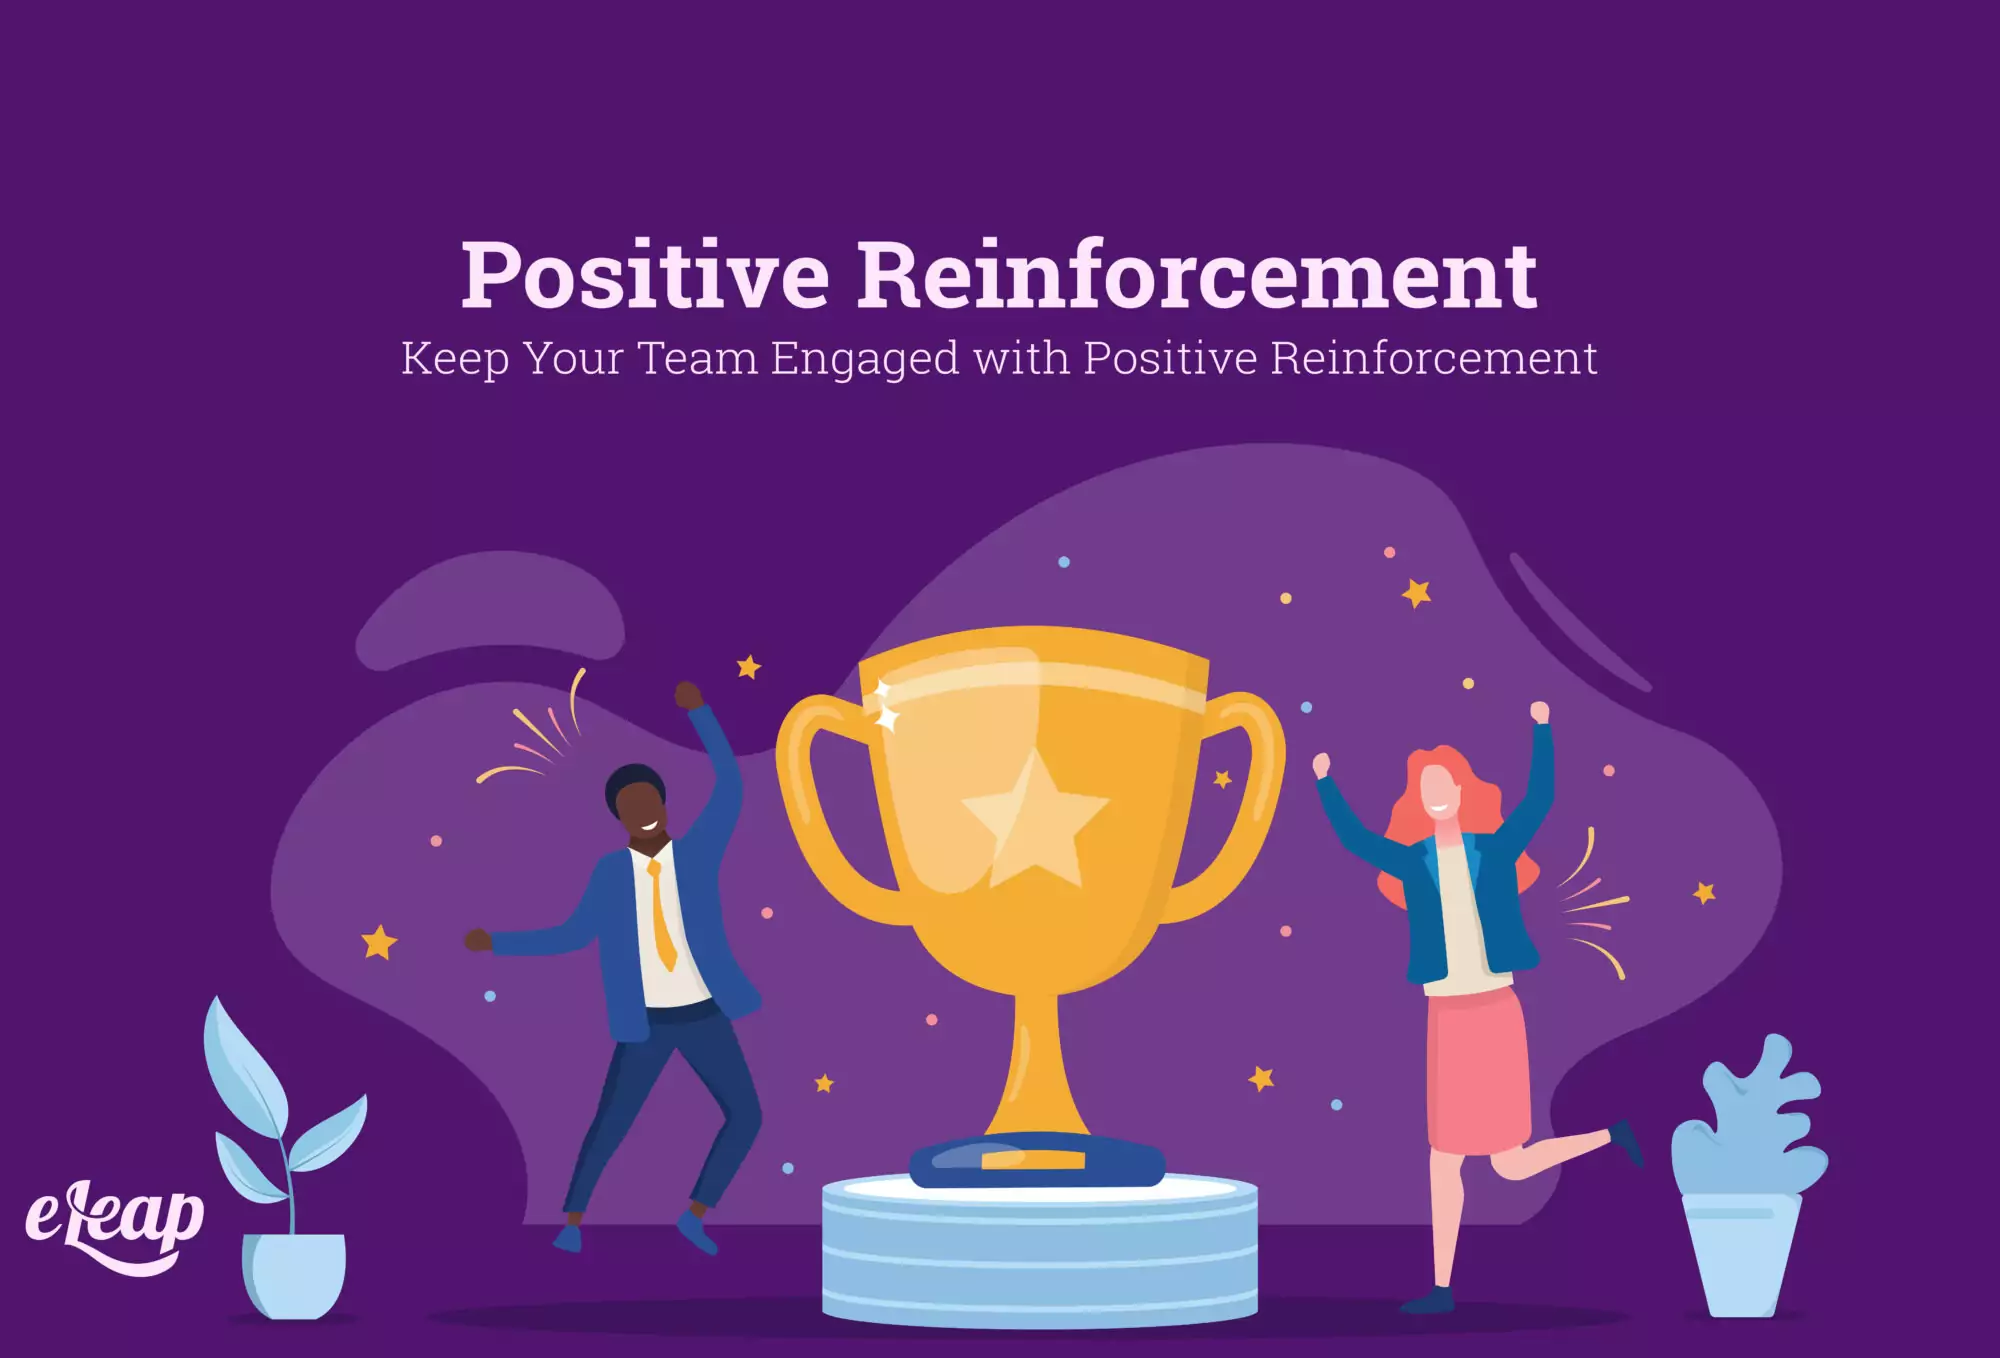 Keep Your Team Engaged with Positive Reinforcement